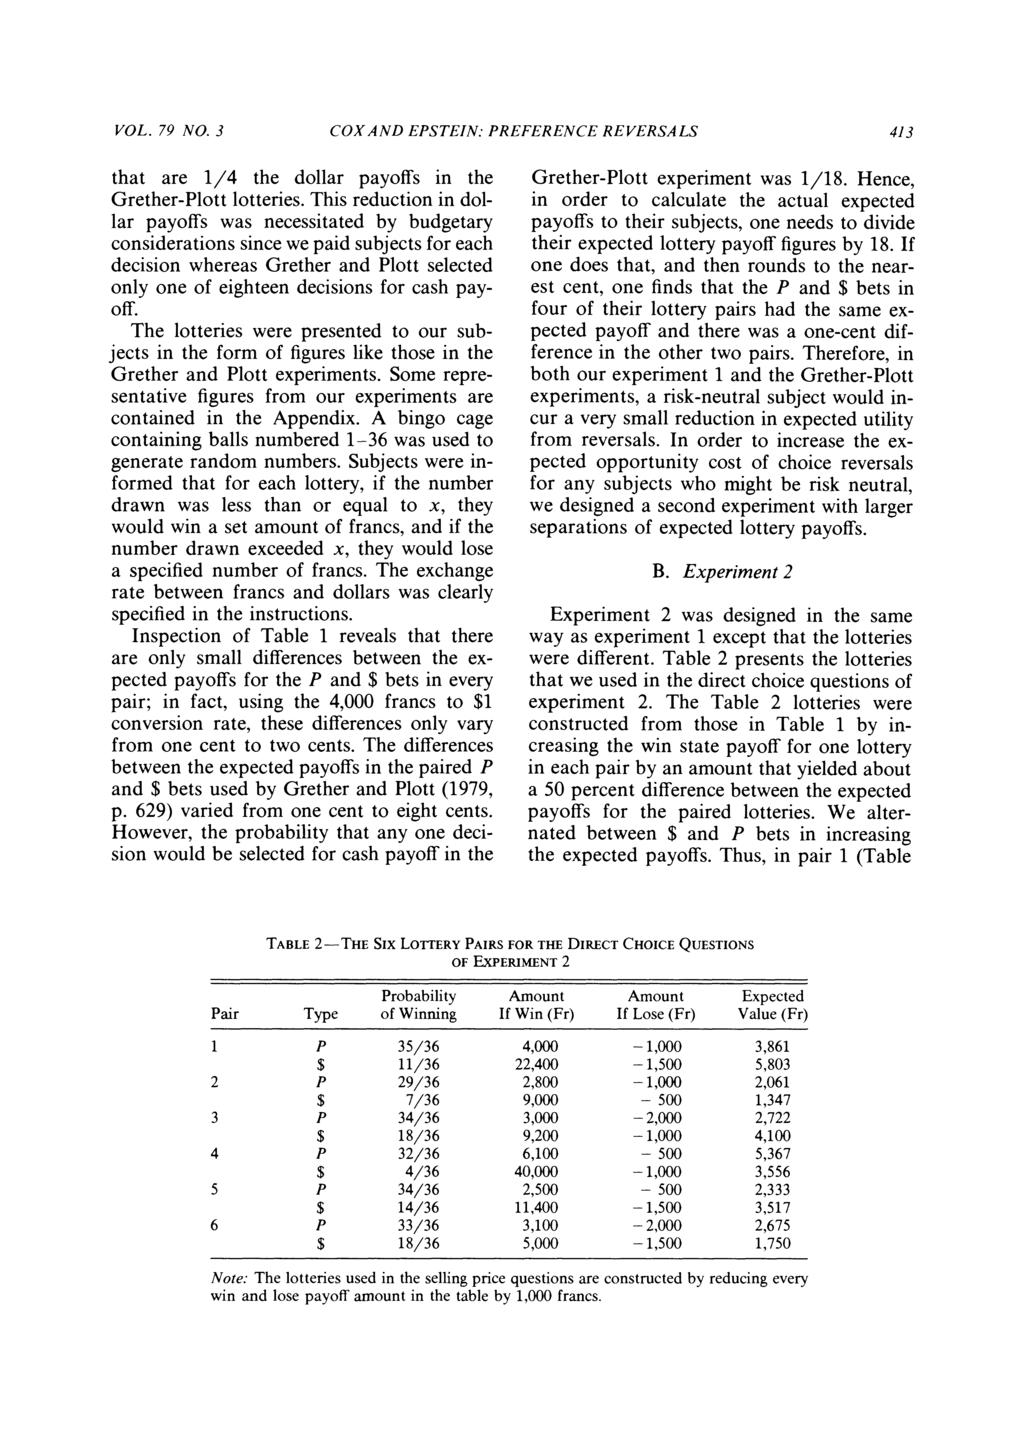 VOL. 79 NO. 3 COXAND EPSTEIN: PREFERENCE REVERSALS 413 that are 1/4 the dollar payoffs in the Grether-Plott lotteries.